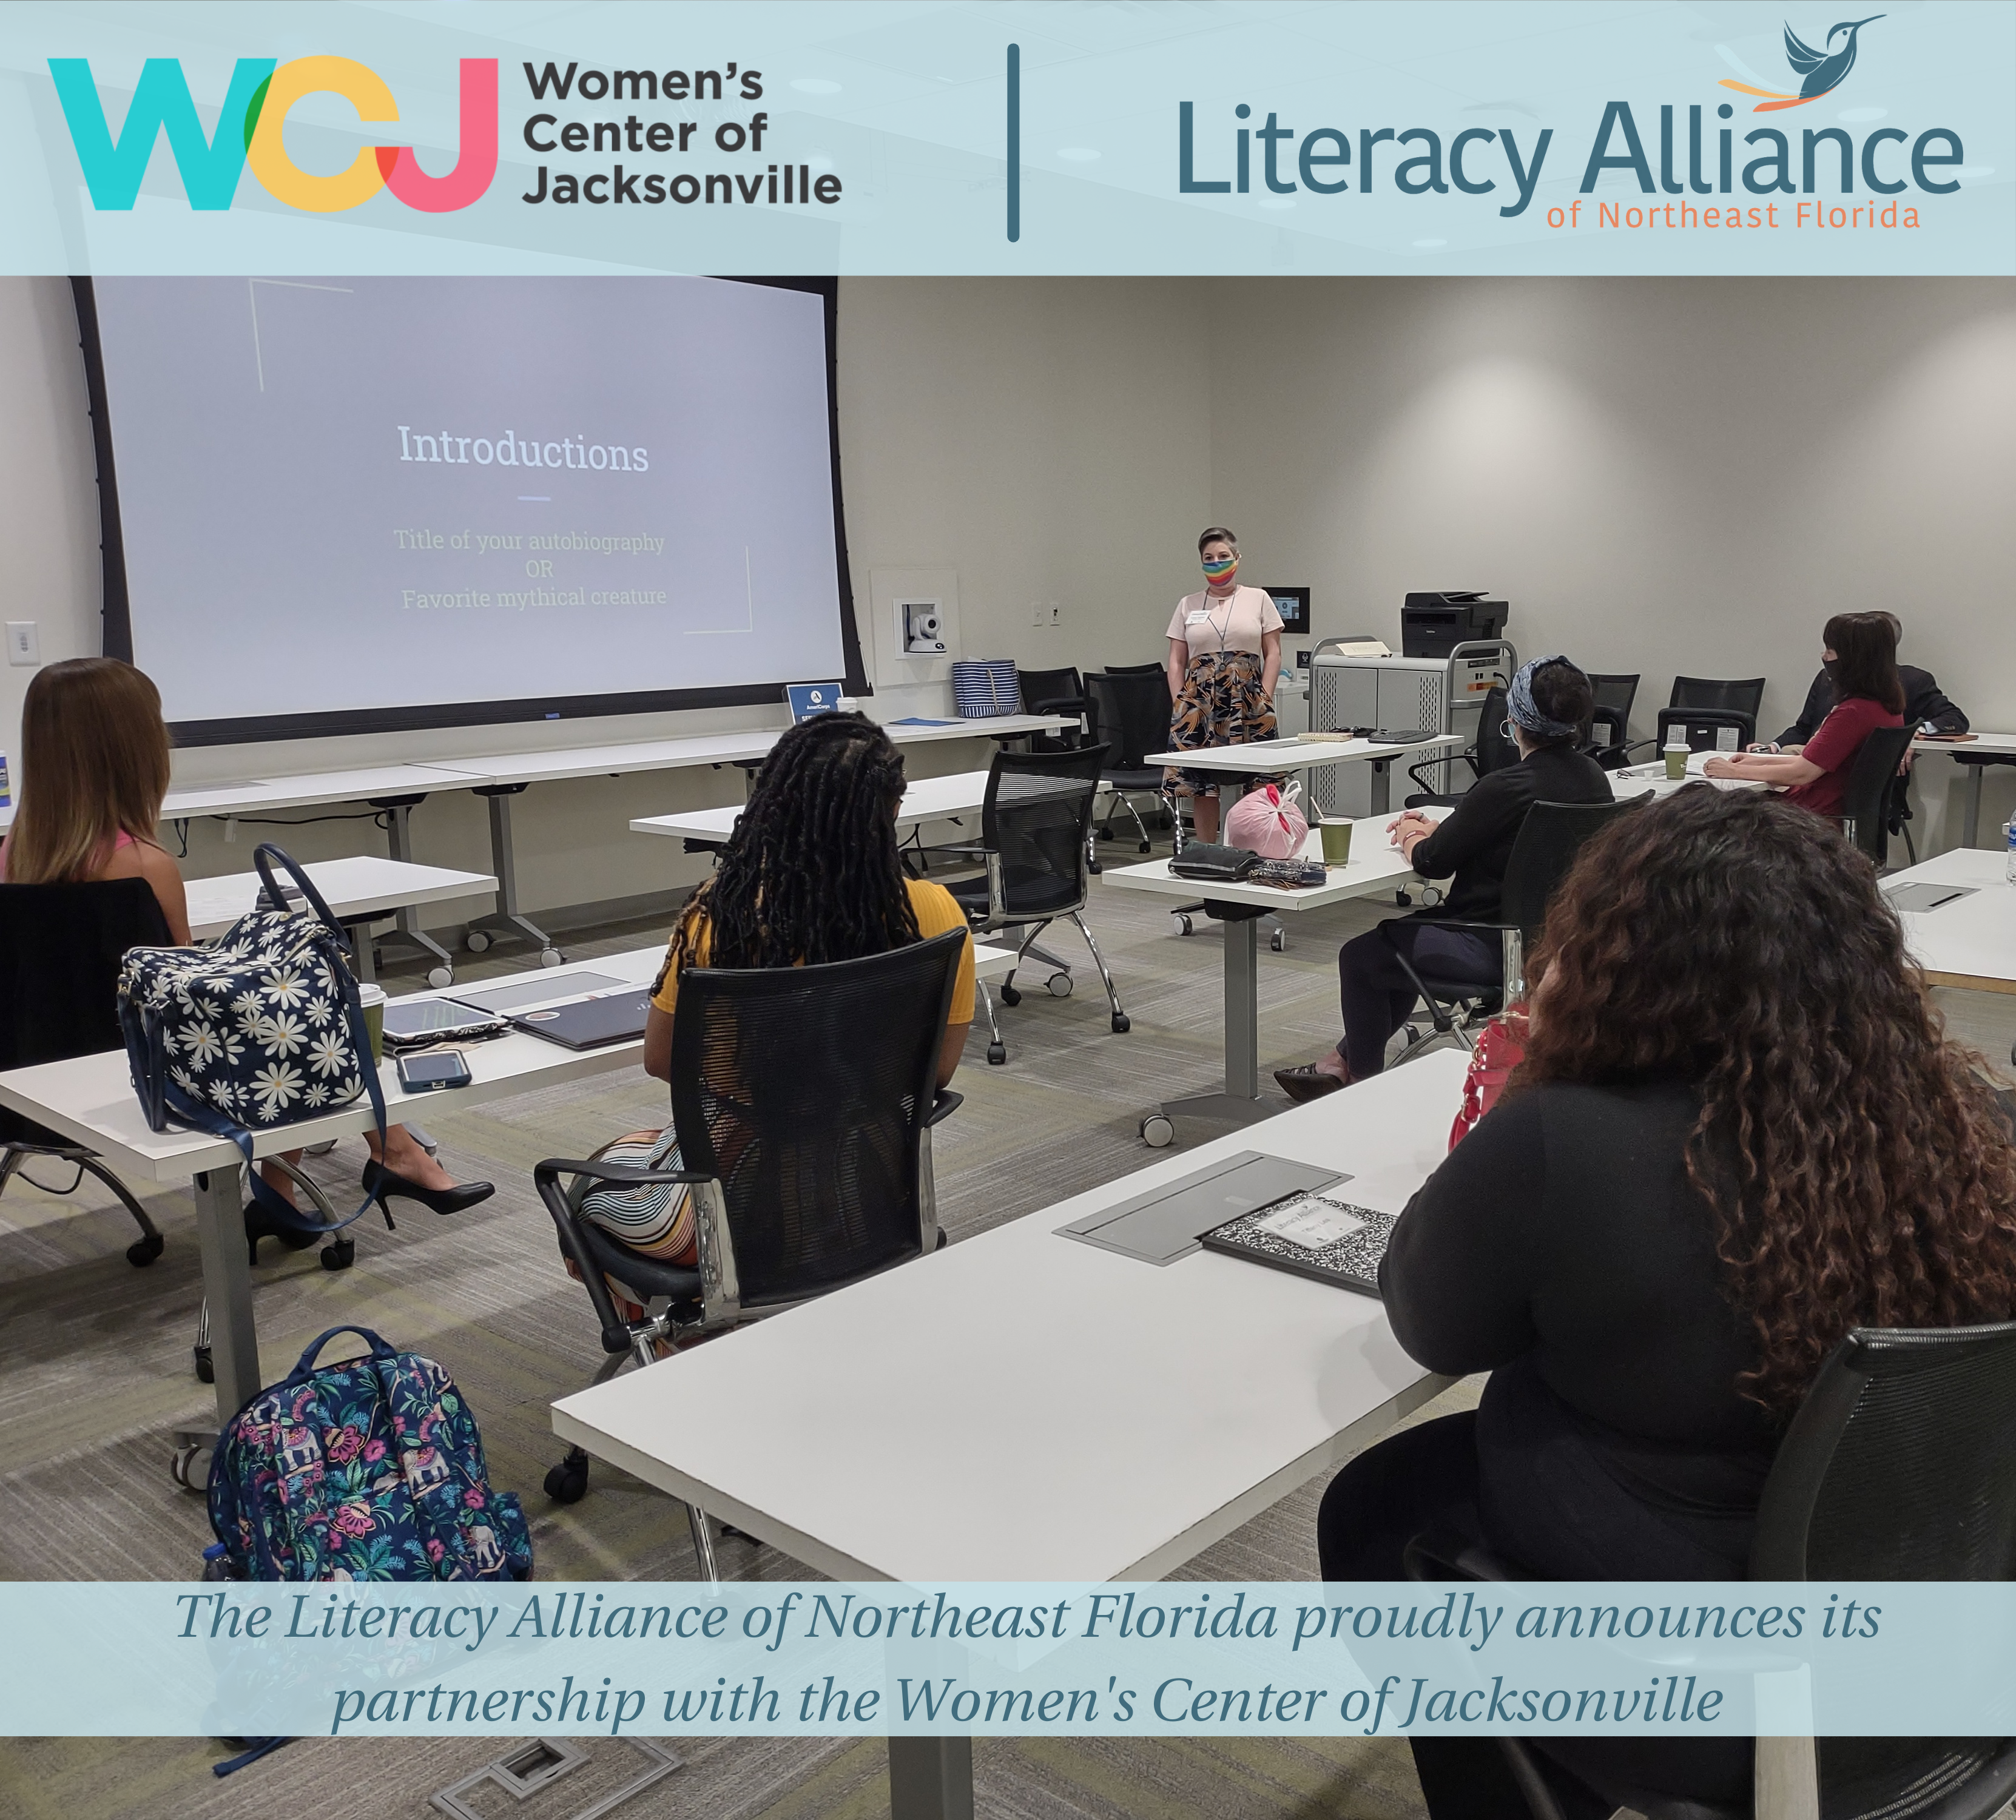 The Women’s Center of Jacksonville Partners with the Literacy Alliance